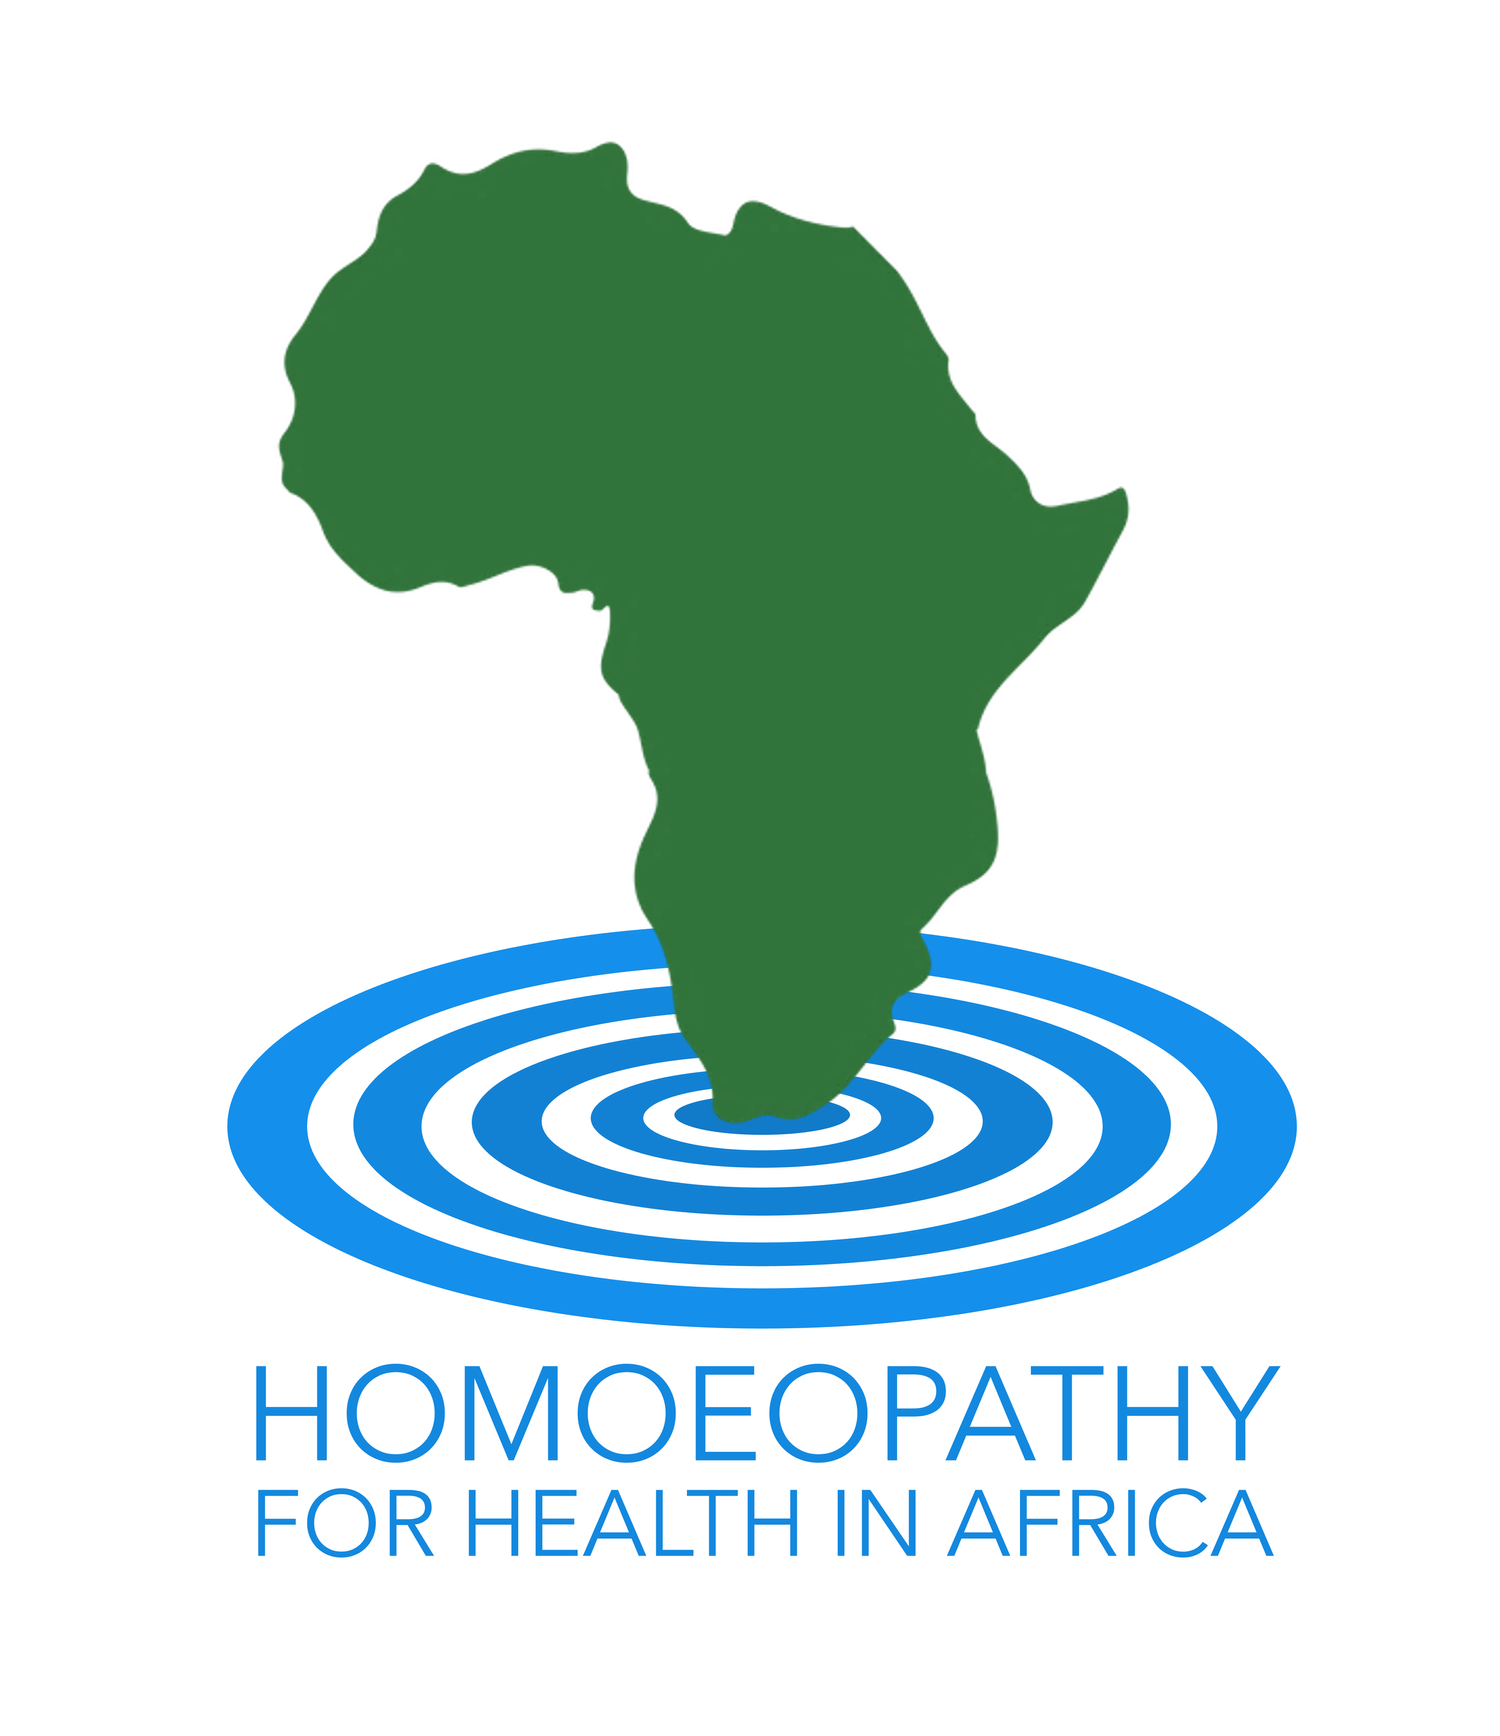 Homeopathy for Health in Africa